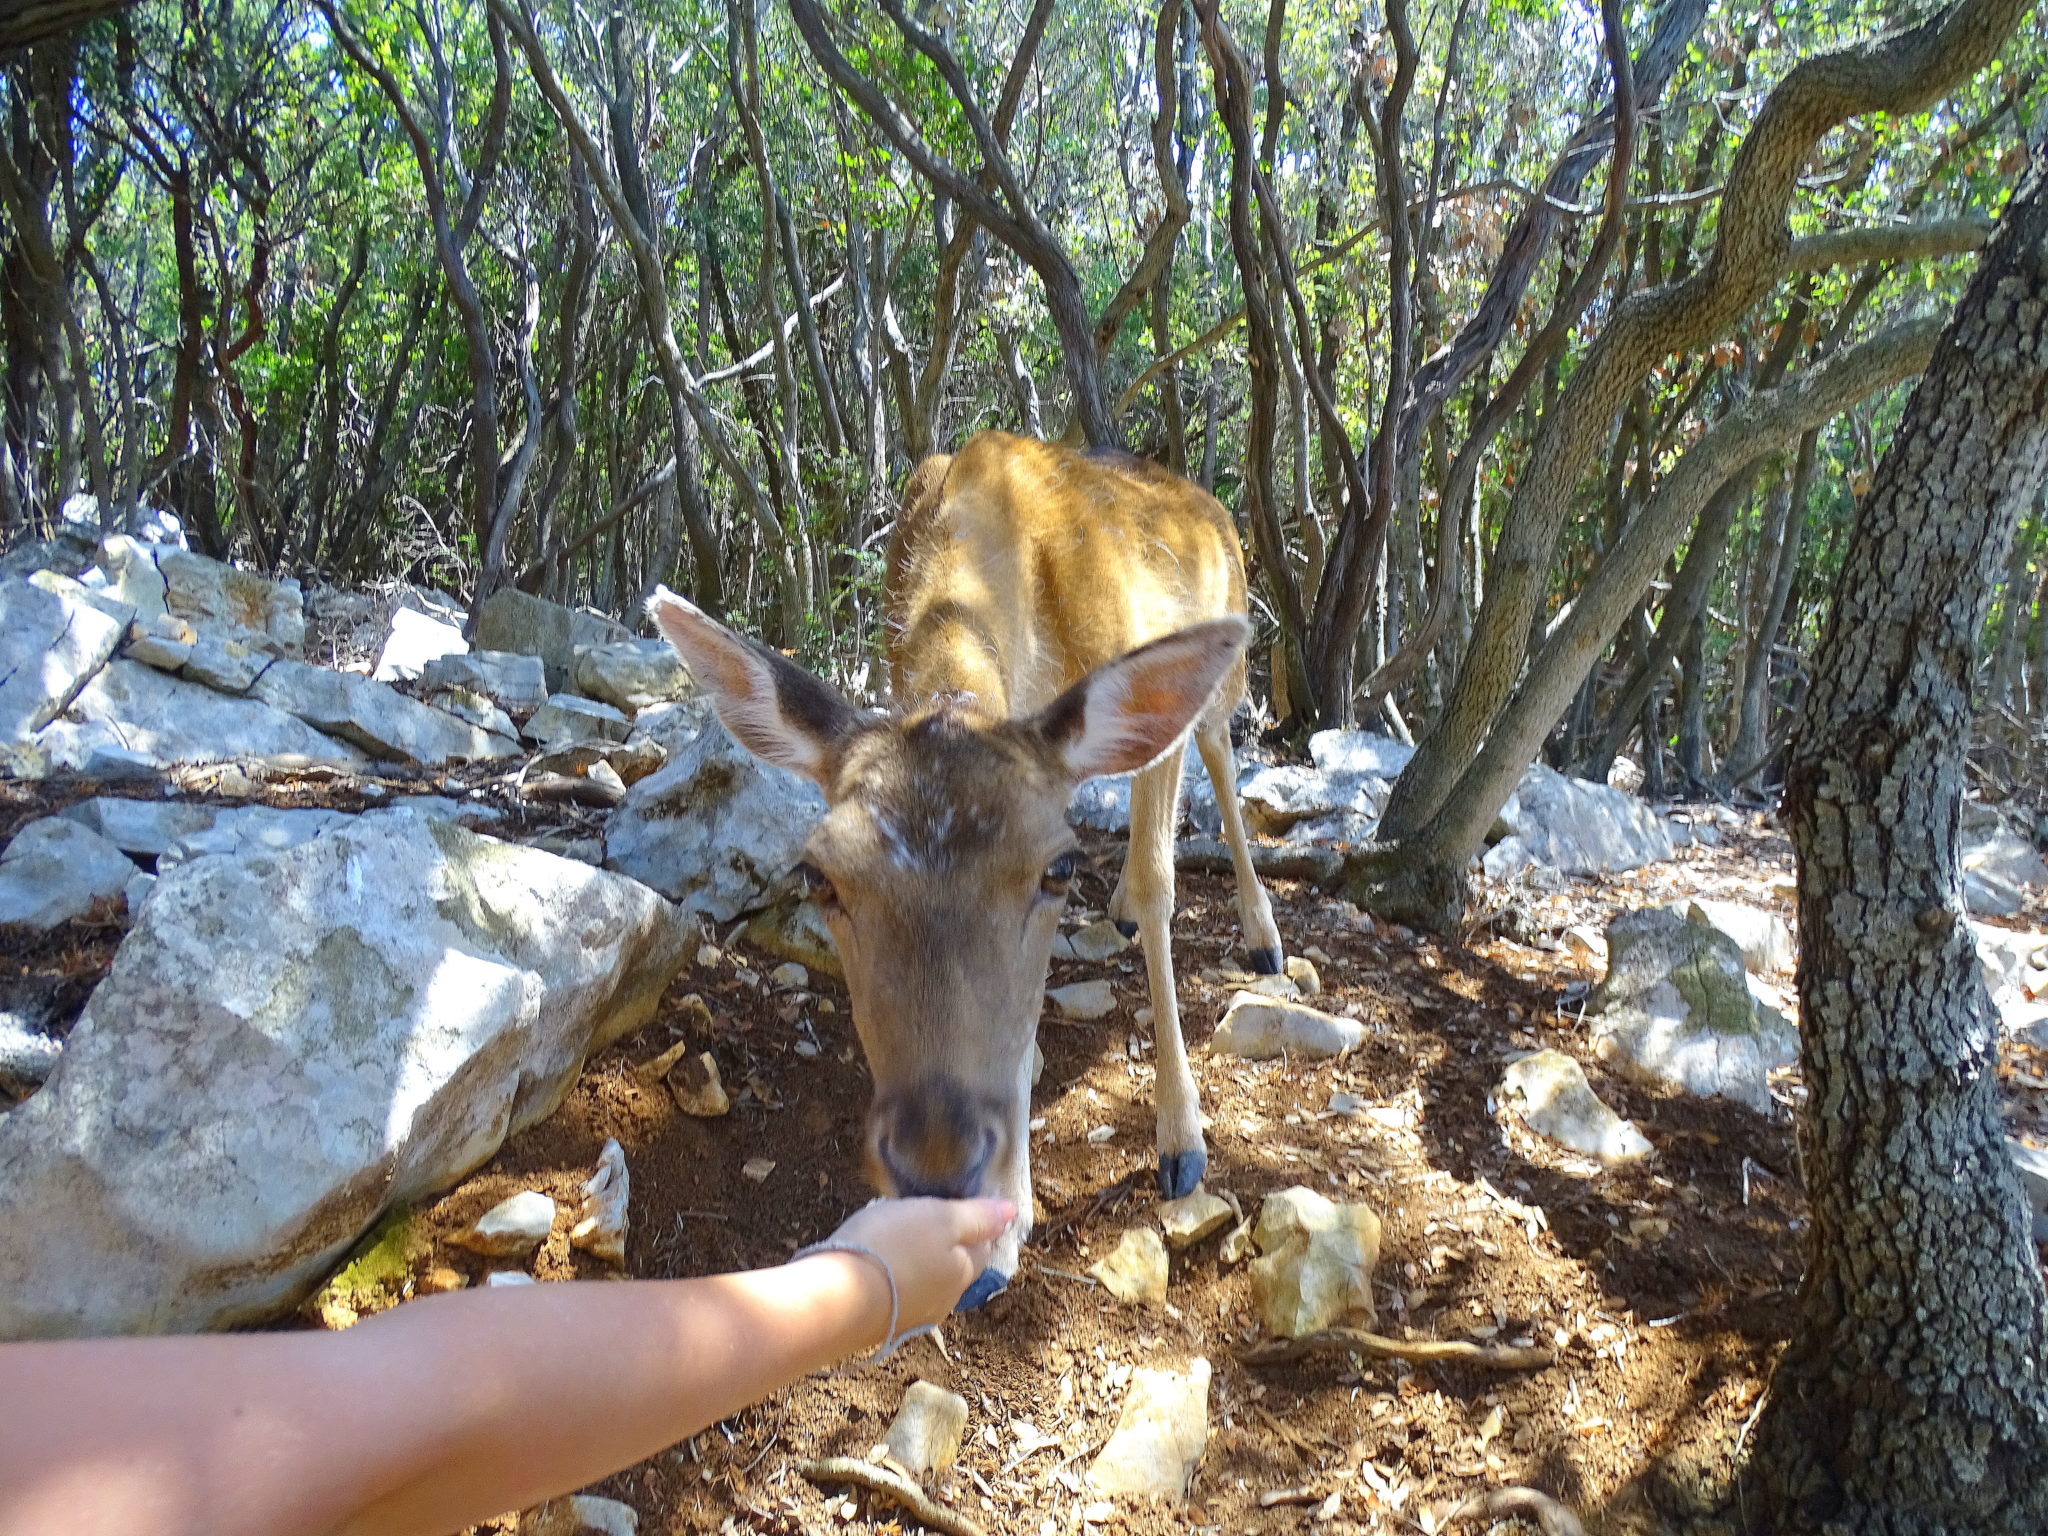 Deer taking food from a hand